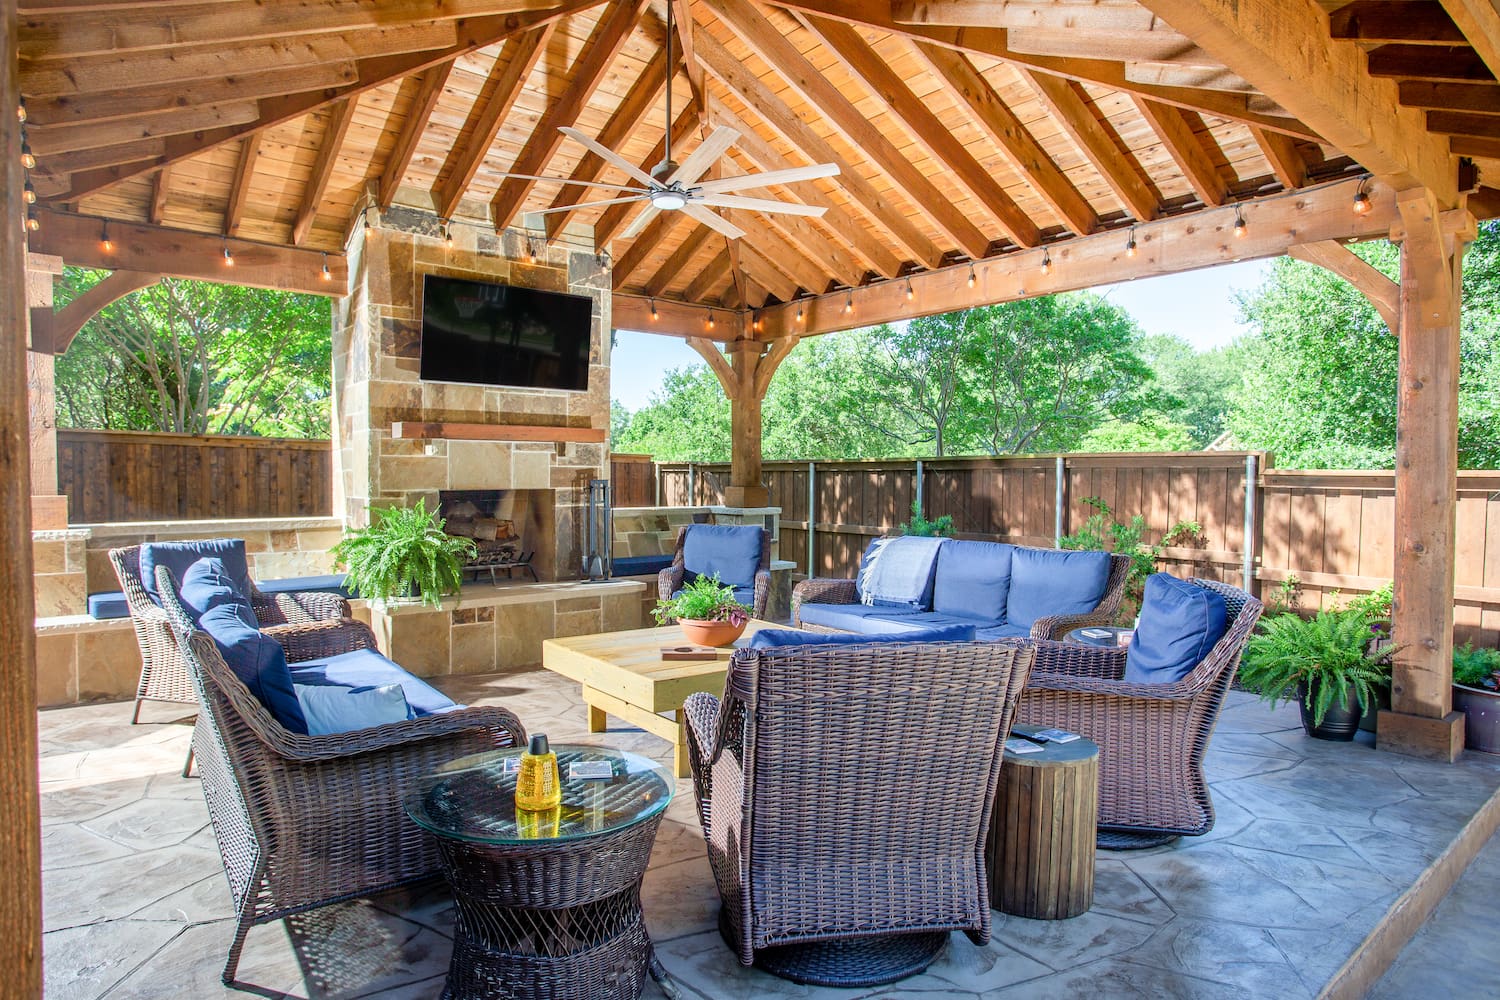 Featured image for “Create an Outdoor Living Space for Football Season”